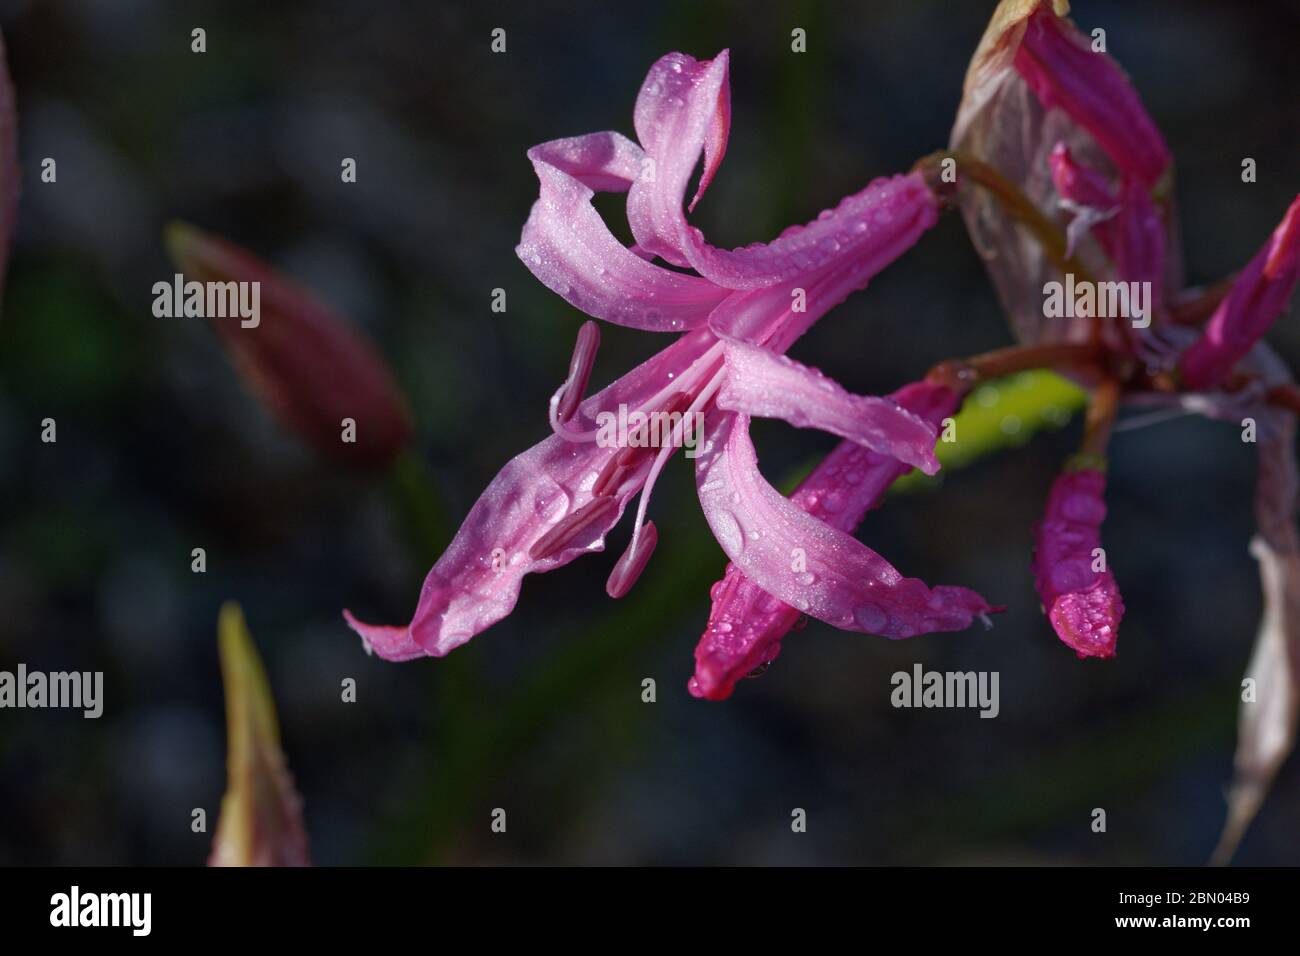 Nerine undulata syn. N. crispa is a species of flowering plant in the subfamily Amaryllidoideae of the family Amaryllidaceae. Stock Photo